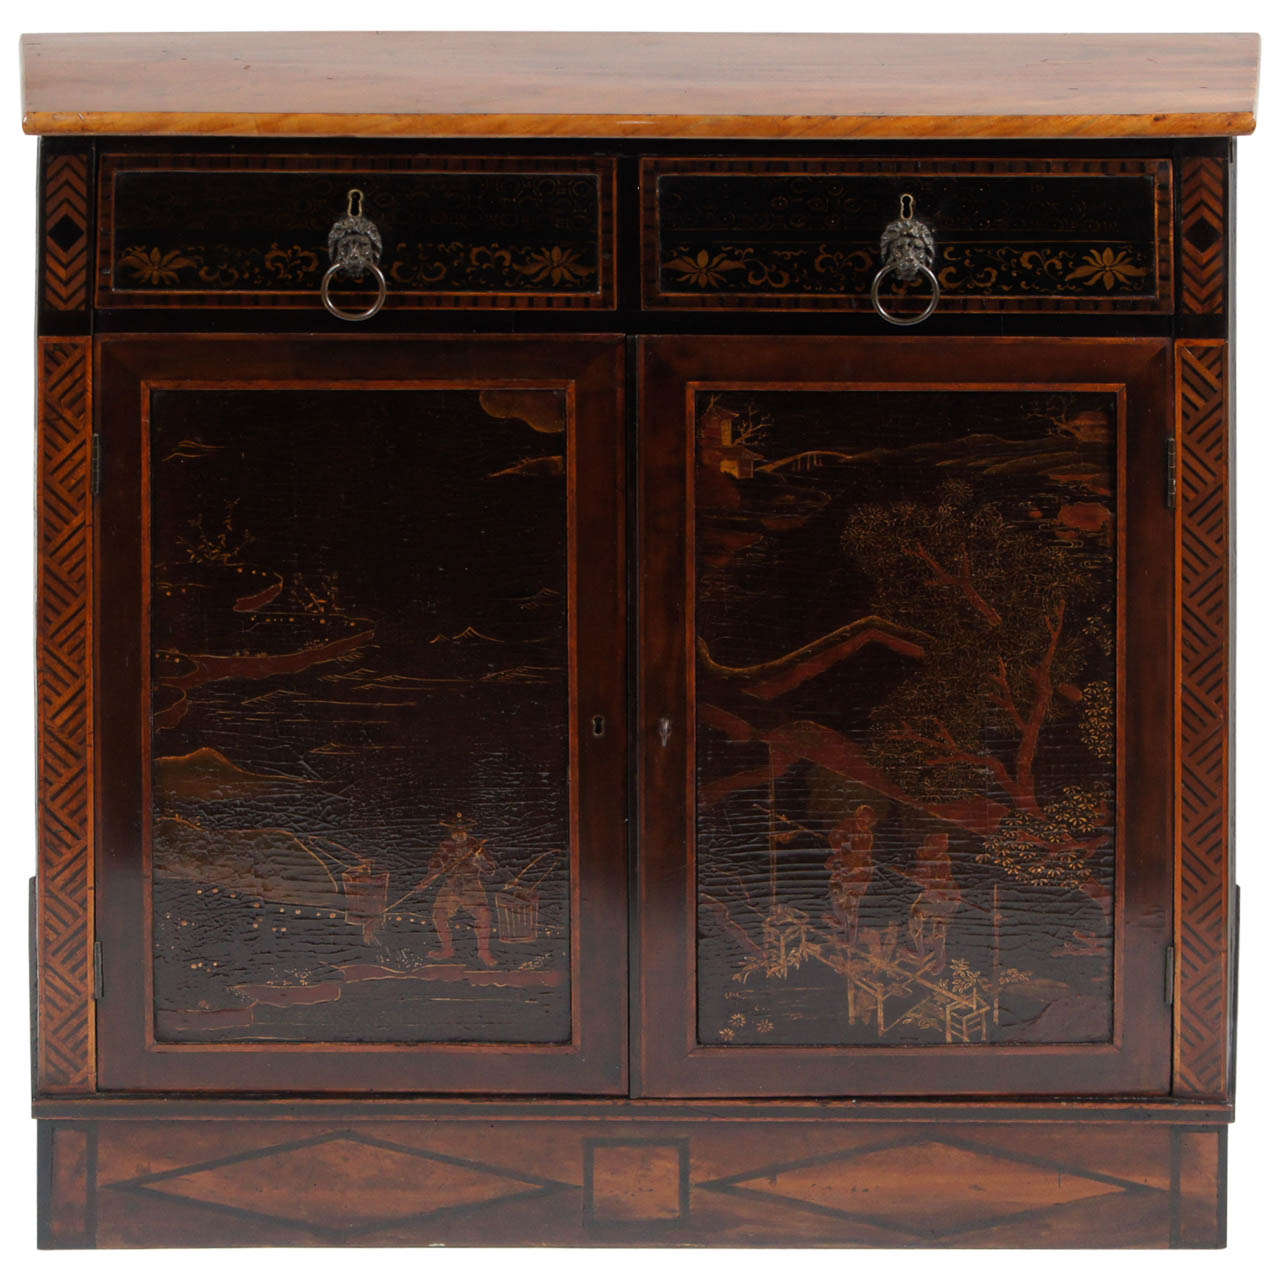 English Regency Chinoiserie Lacquer Console Cabinet, c. 1805